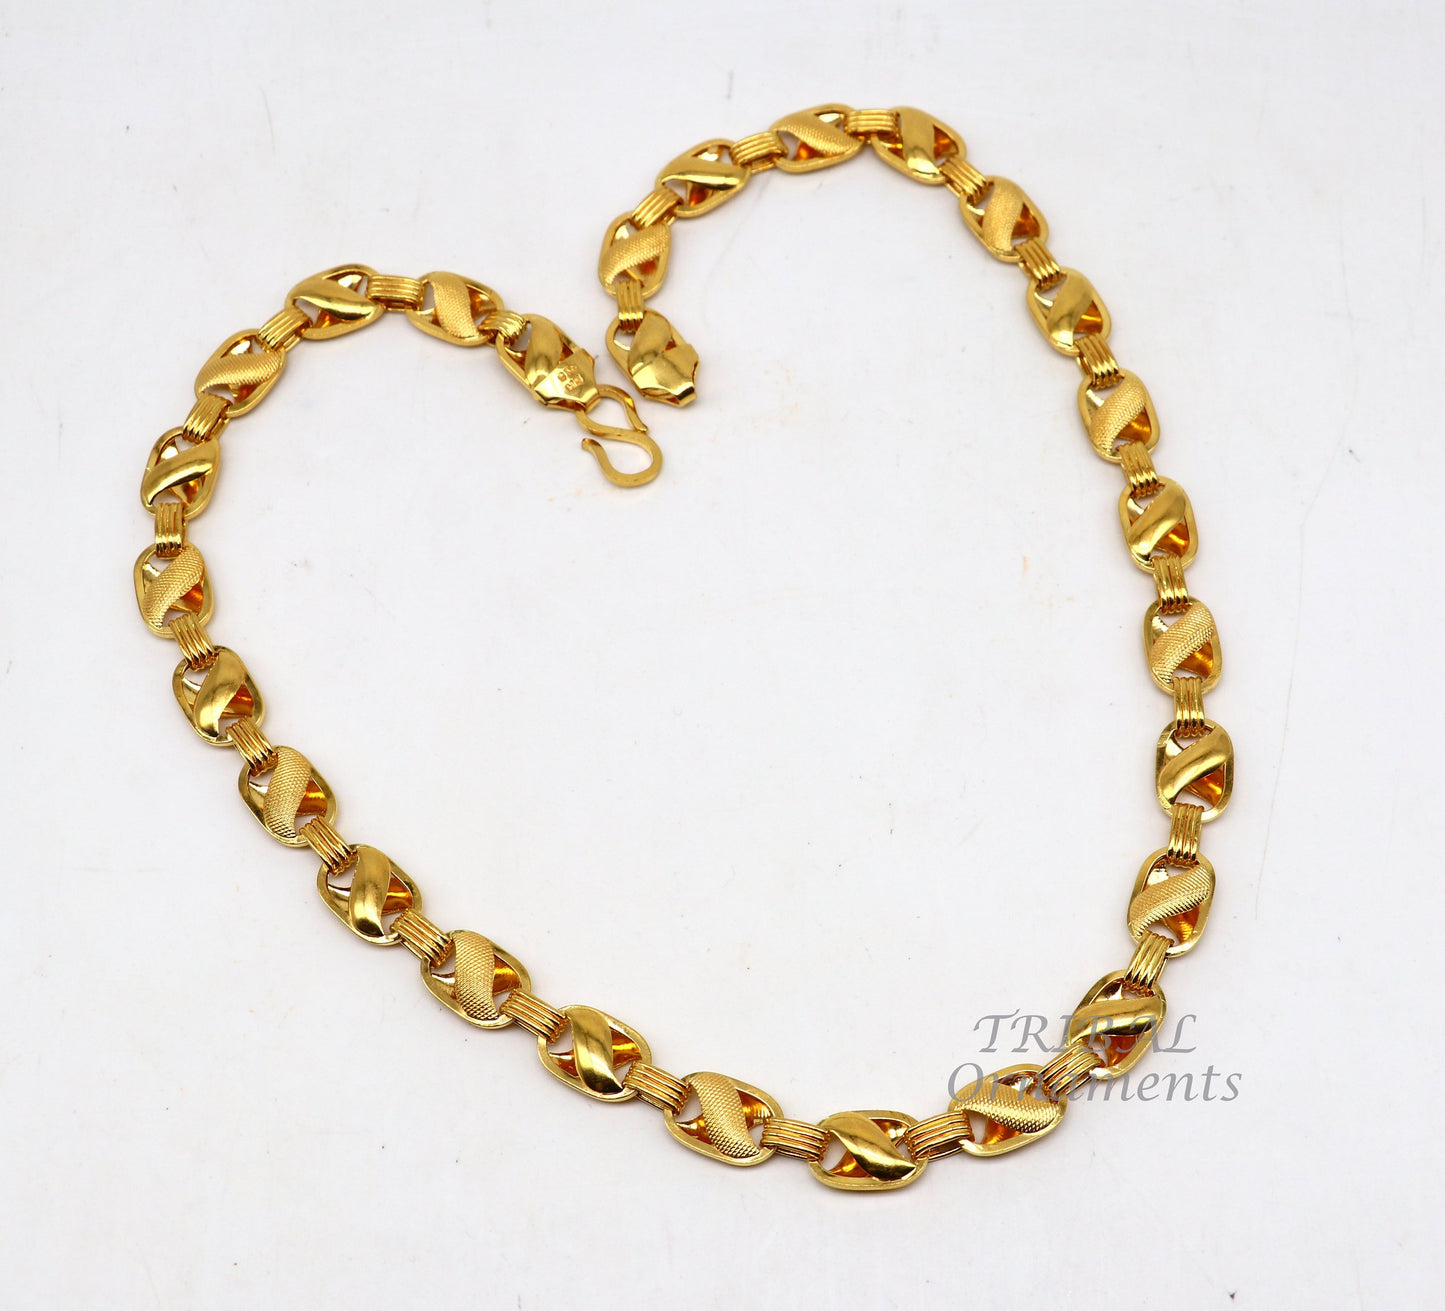 22k yellow gold handmade fabulous Lotus chain necklace excellent gold men's boy's chain certified unique handmade  gifting jewelry ch566 - TRIBAL ORNAMENTS